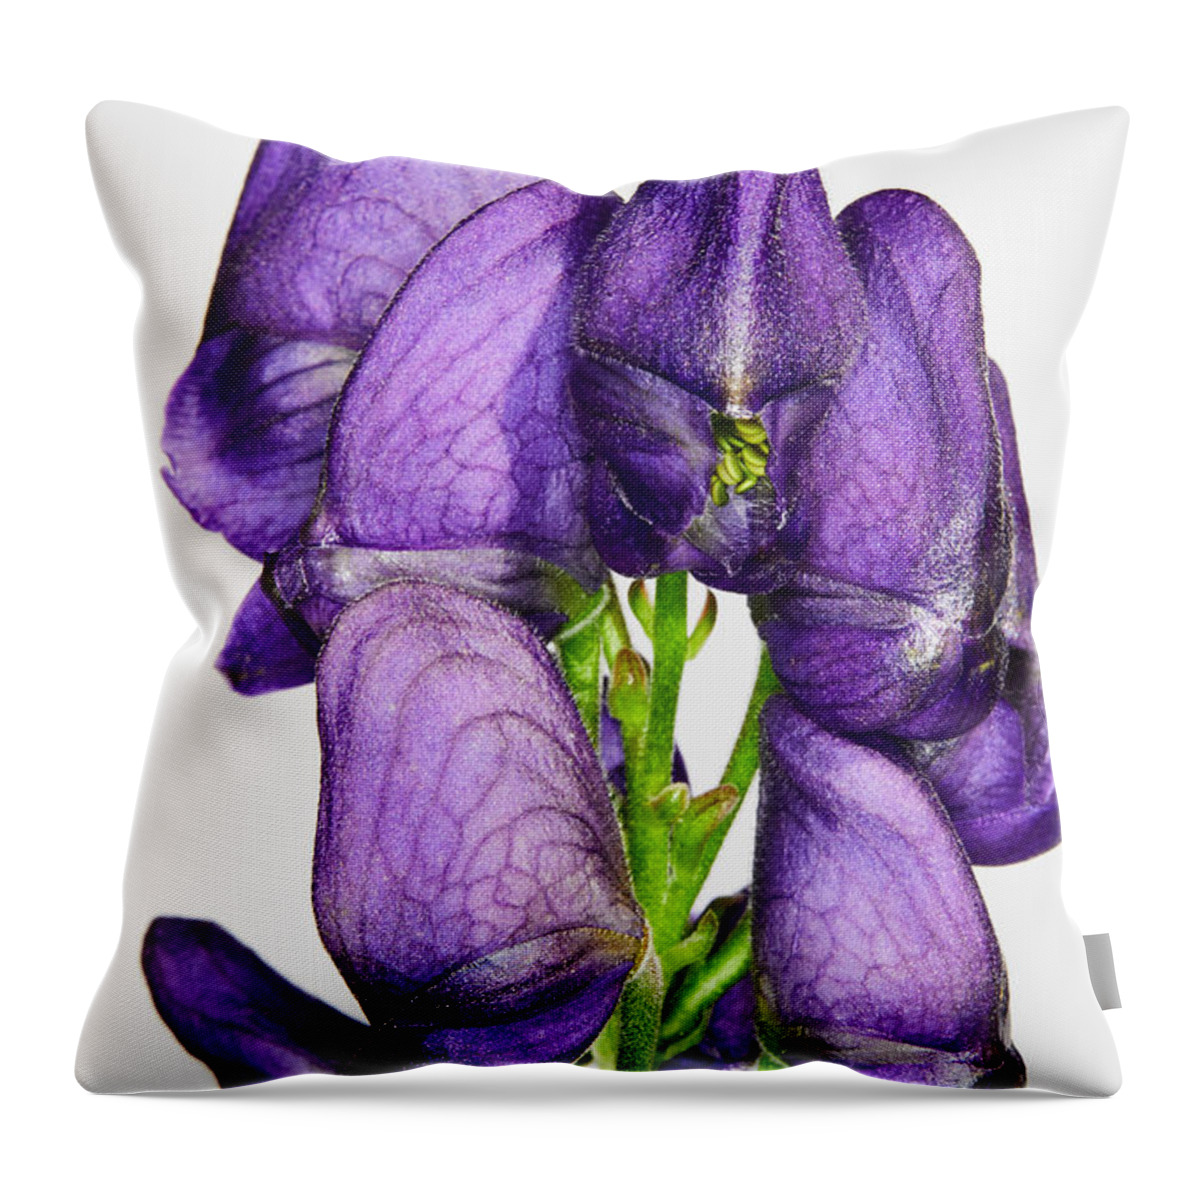 Flower Throw Pillow featuring the photograph Wolf's bane flower buds by Nick Biemans